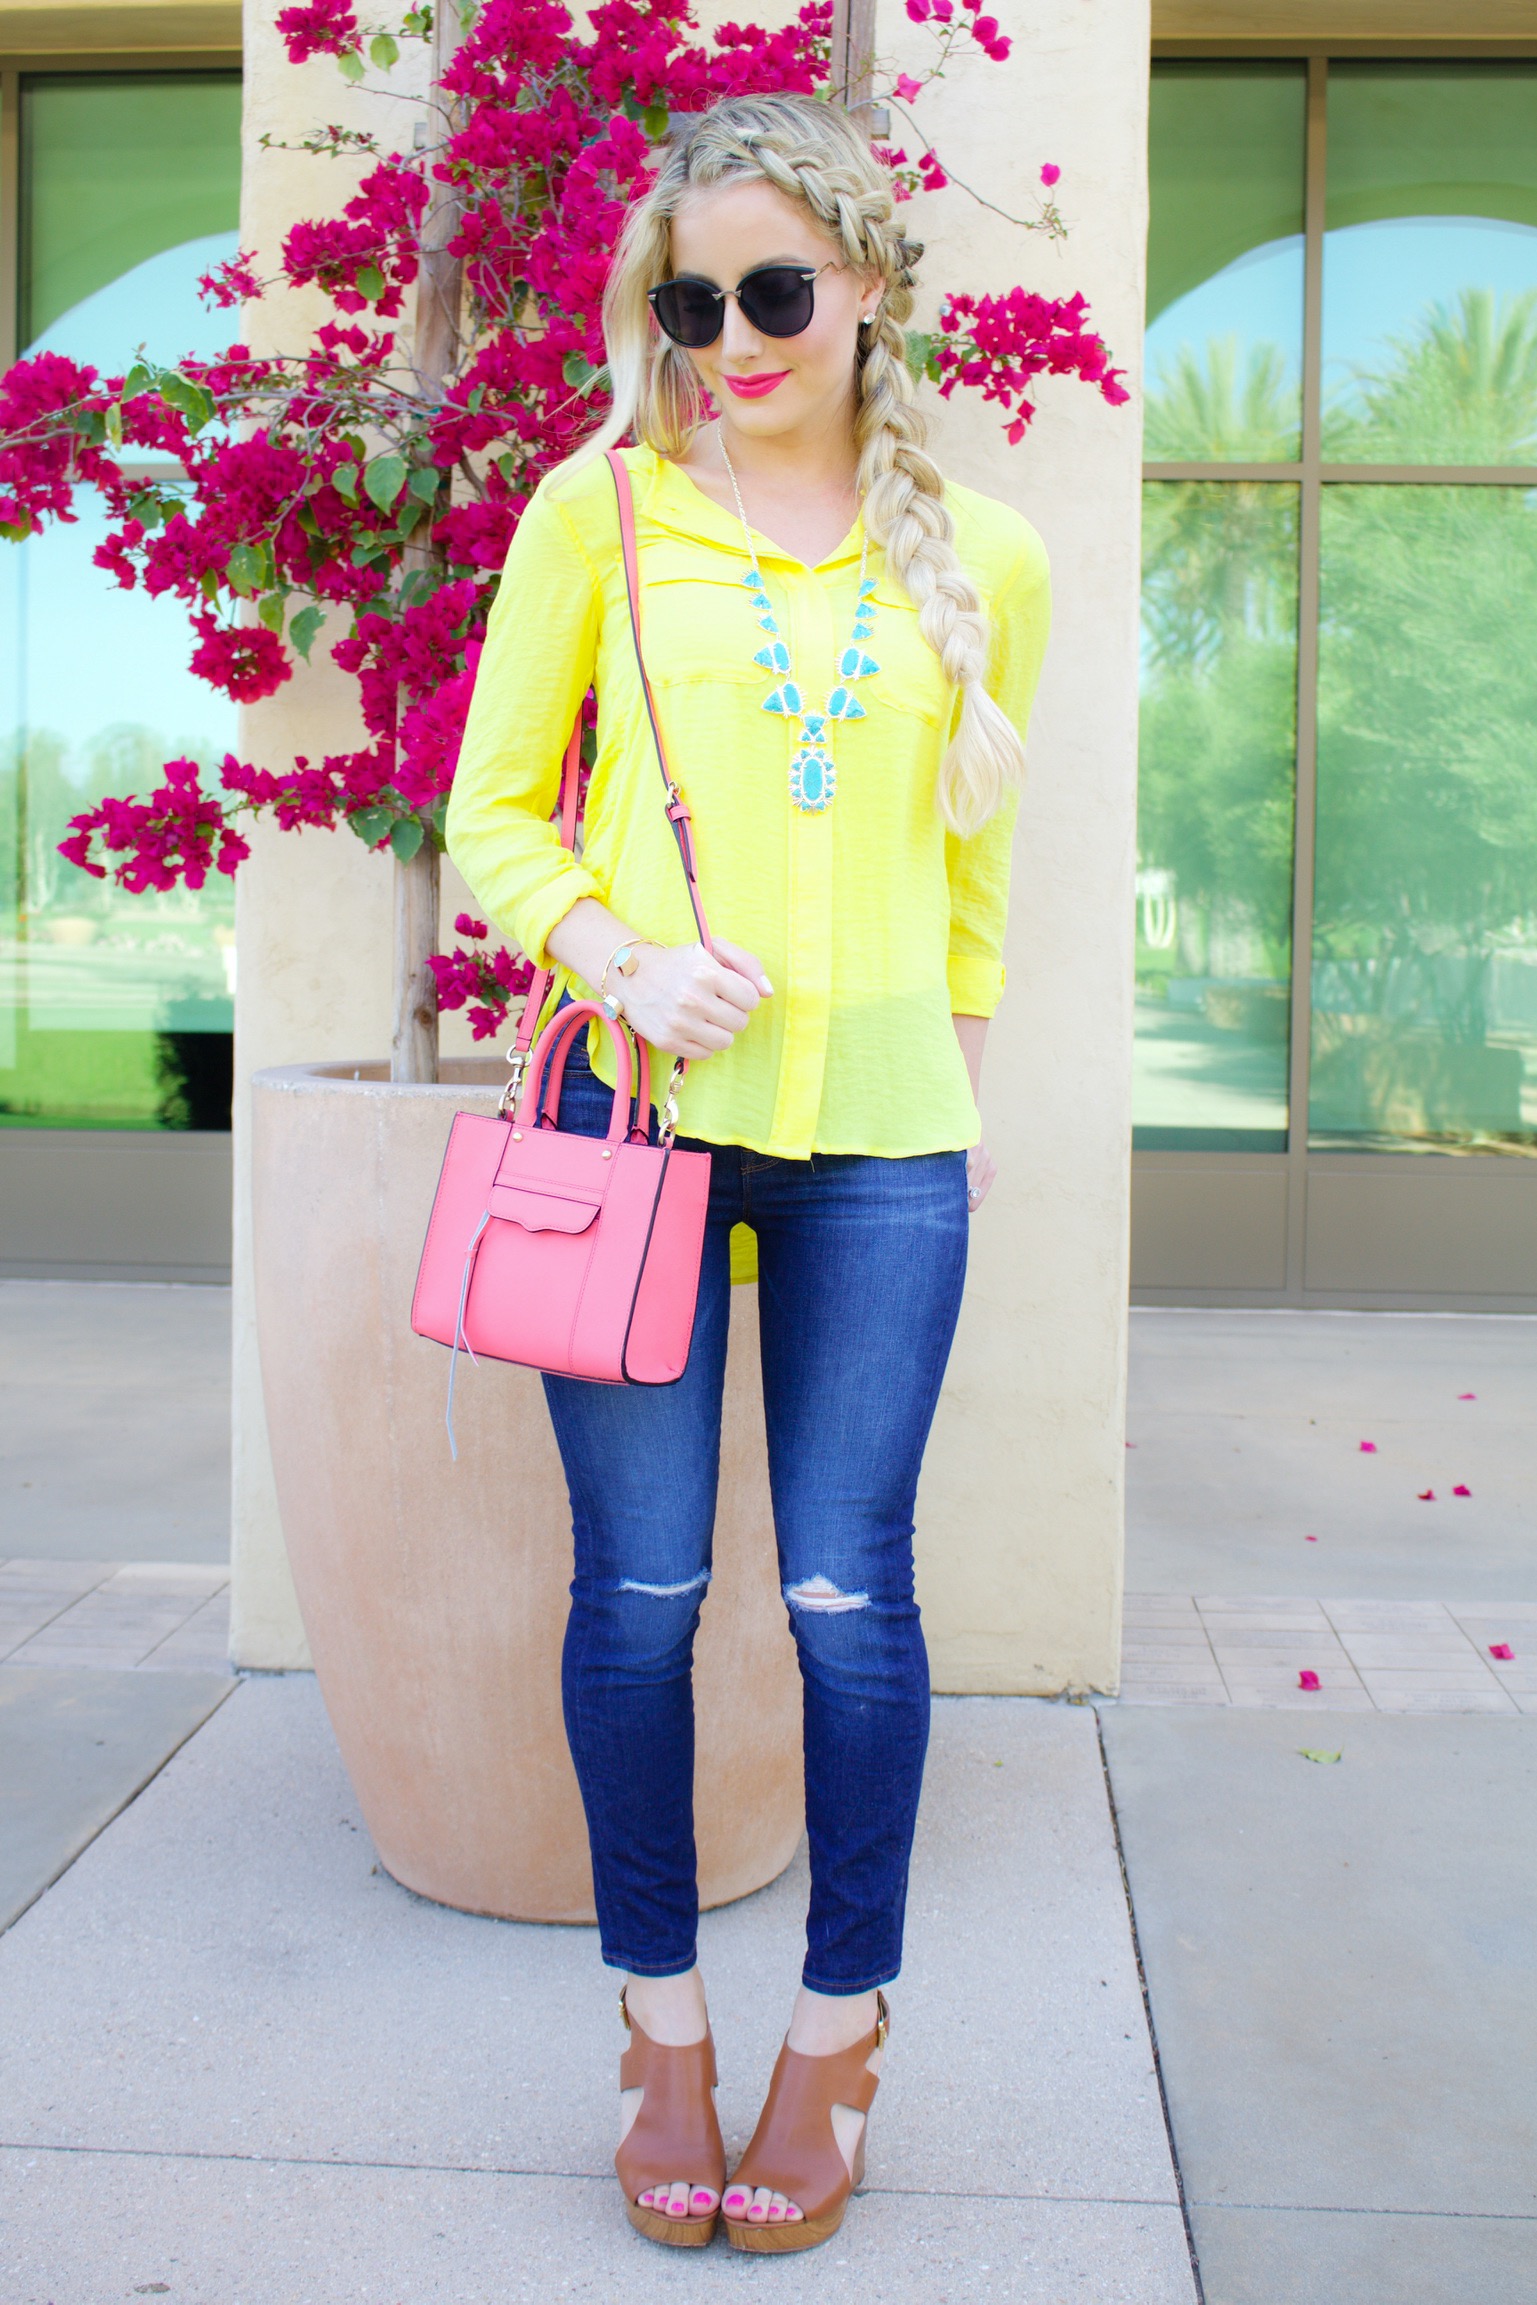 POPS OF YELLOW + PINK - A Touch of Pink